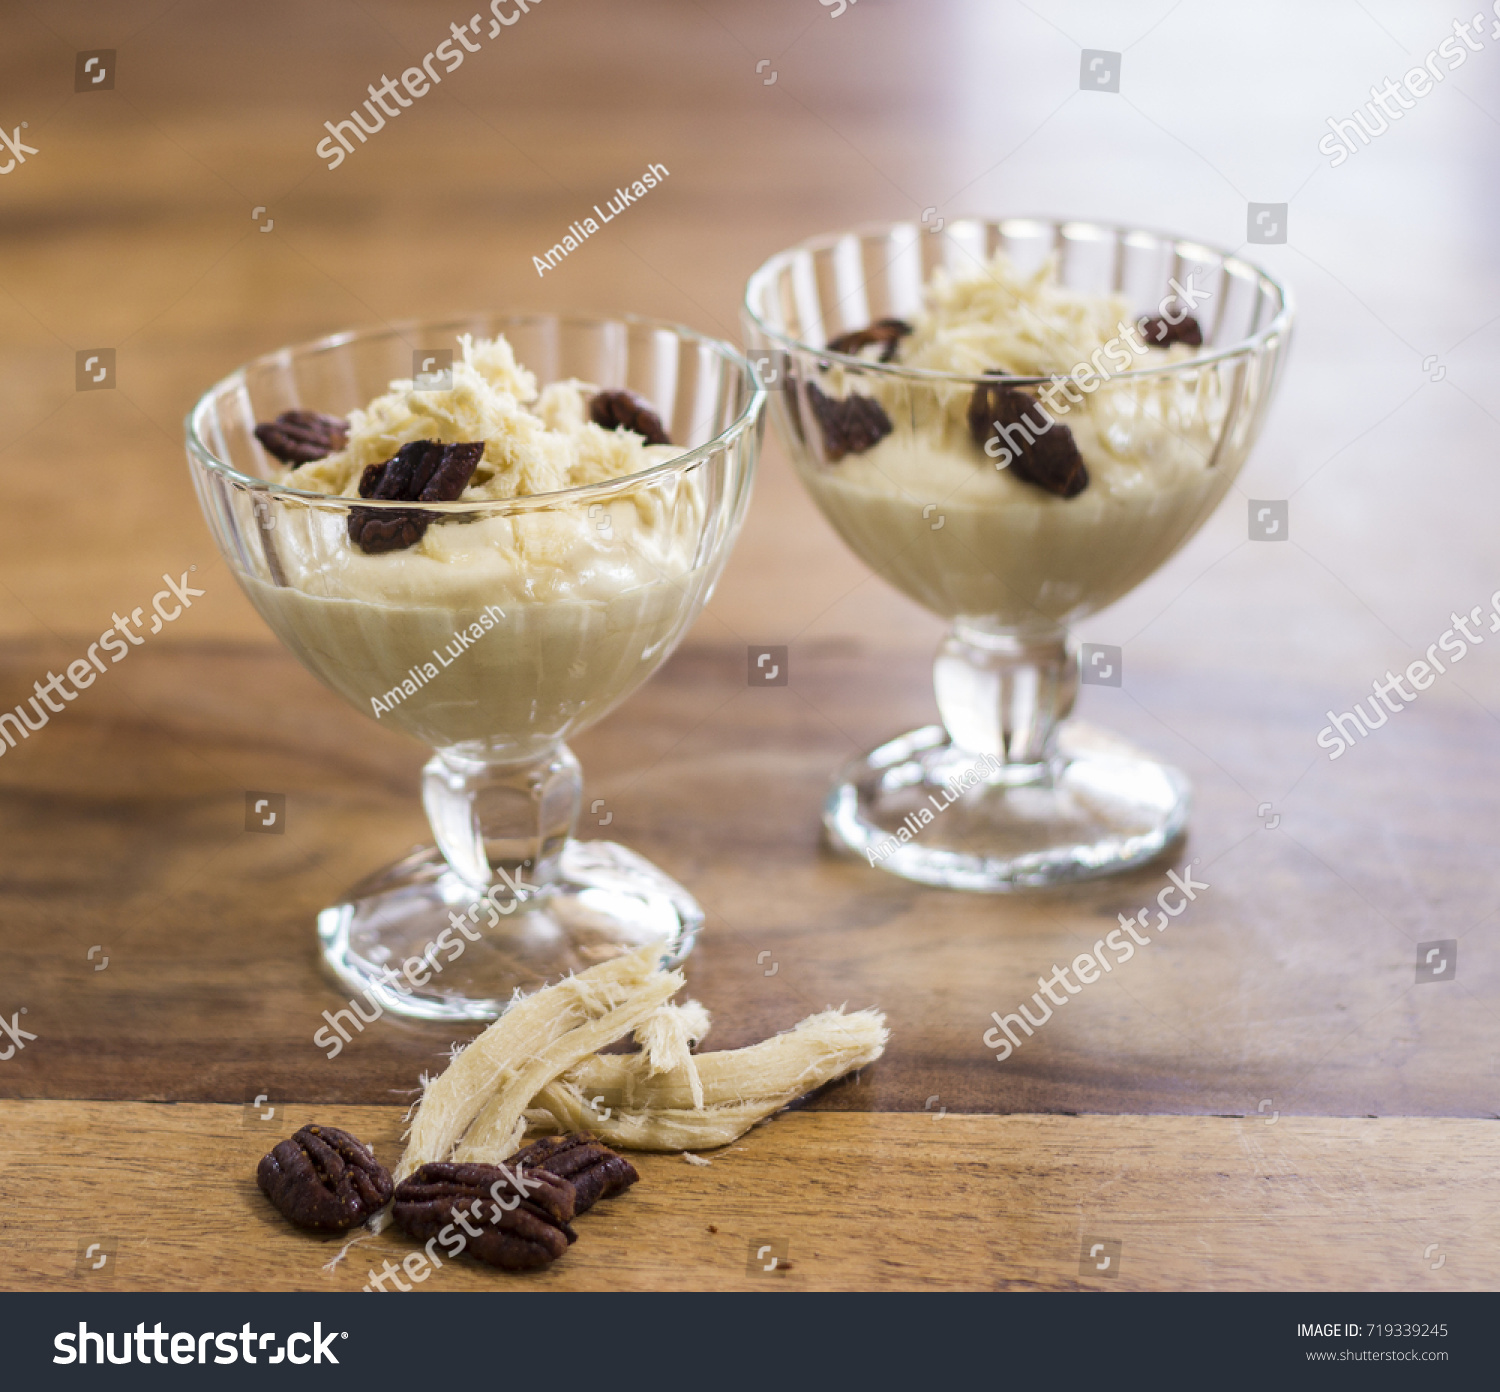 Halwa mousse with sugared pecans #719339245